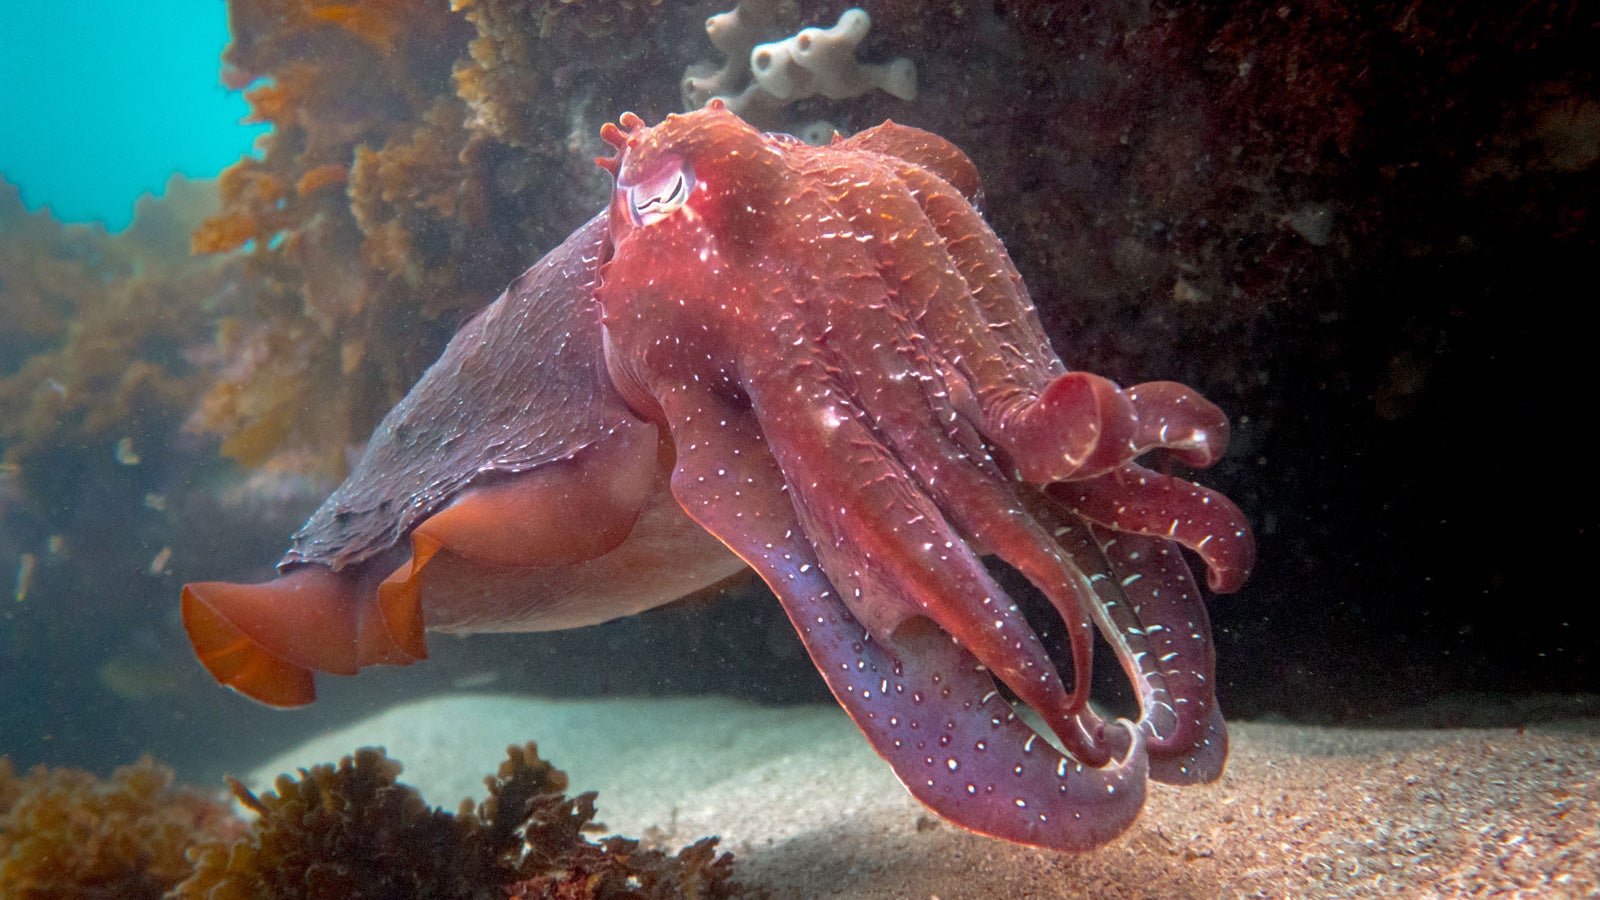 The Australian Cuttlefish, pink in this photo and shown swimming in an ocean reef, but using cells known as chromatophores, the cuttlefish can put on spectacular displays, changing color in an instant